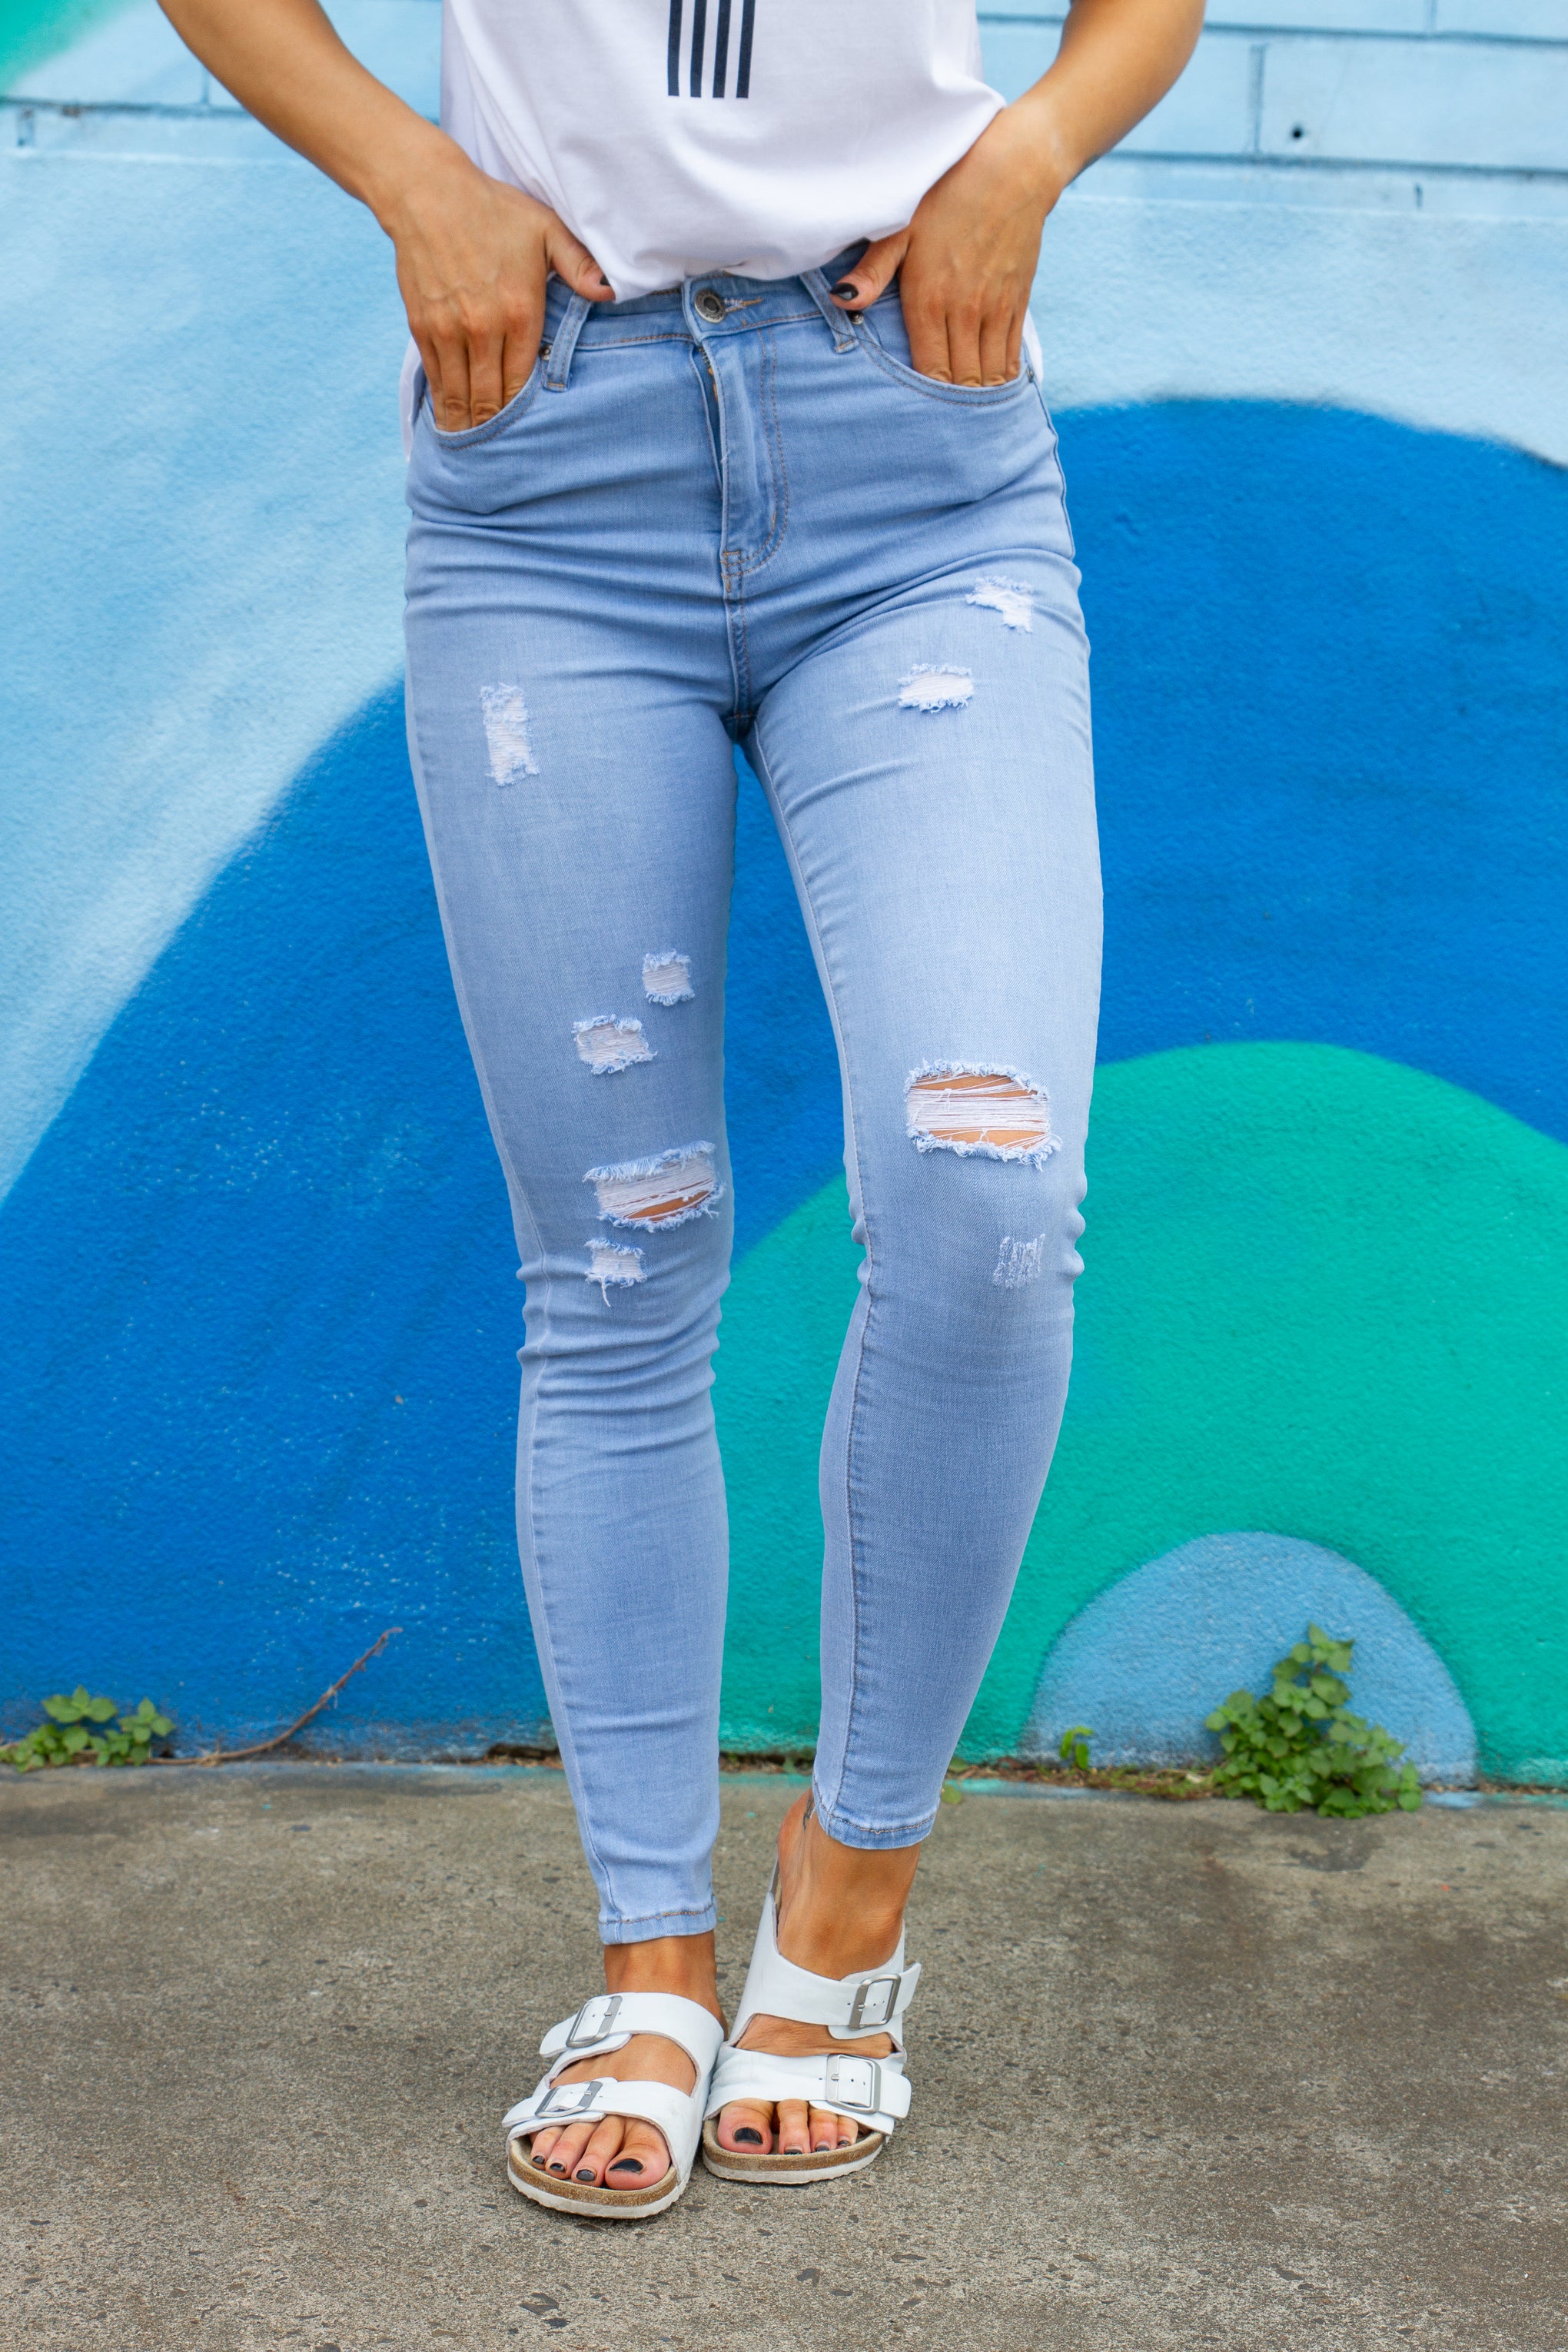 A little bit of edge to complete your denim selection. Our River Jeans are stretchy comfy & a great blue denim.   Details:  Distressed denim Skinny leg fit Functional pockets Light blue denim Sizing:  Elle wears a size 8 - true to size Fabric:  Cotton/Polyester/Elastane blend Measurements:   Size 16 Waist: 40cm Waist to ankle: 94cm Ankle: 16cm